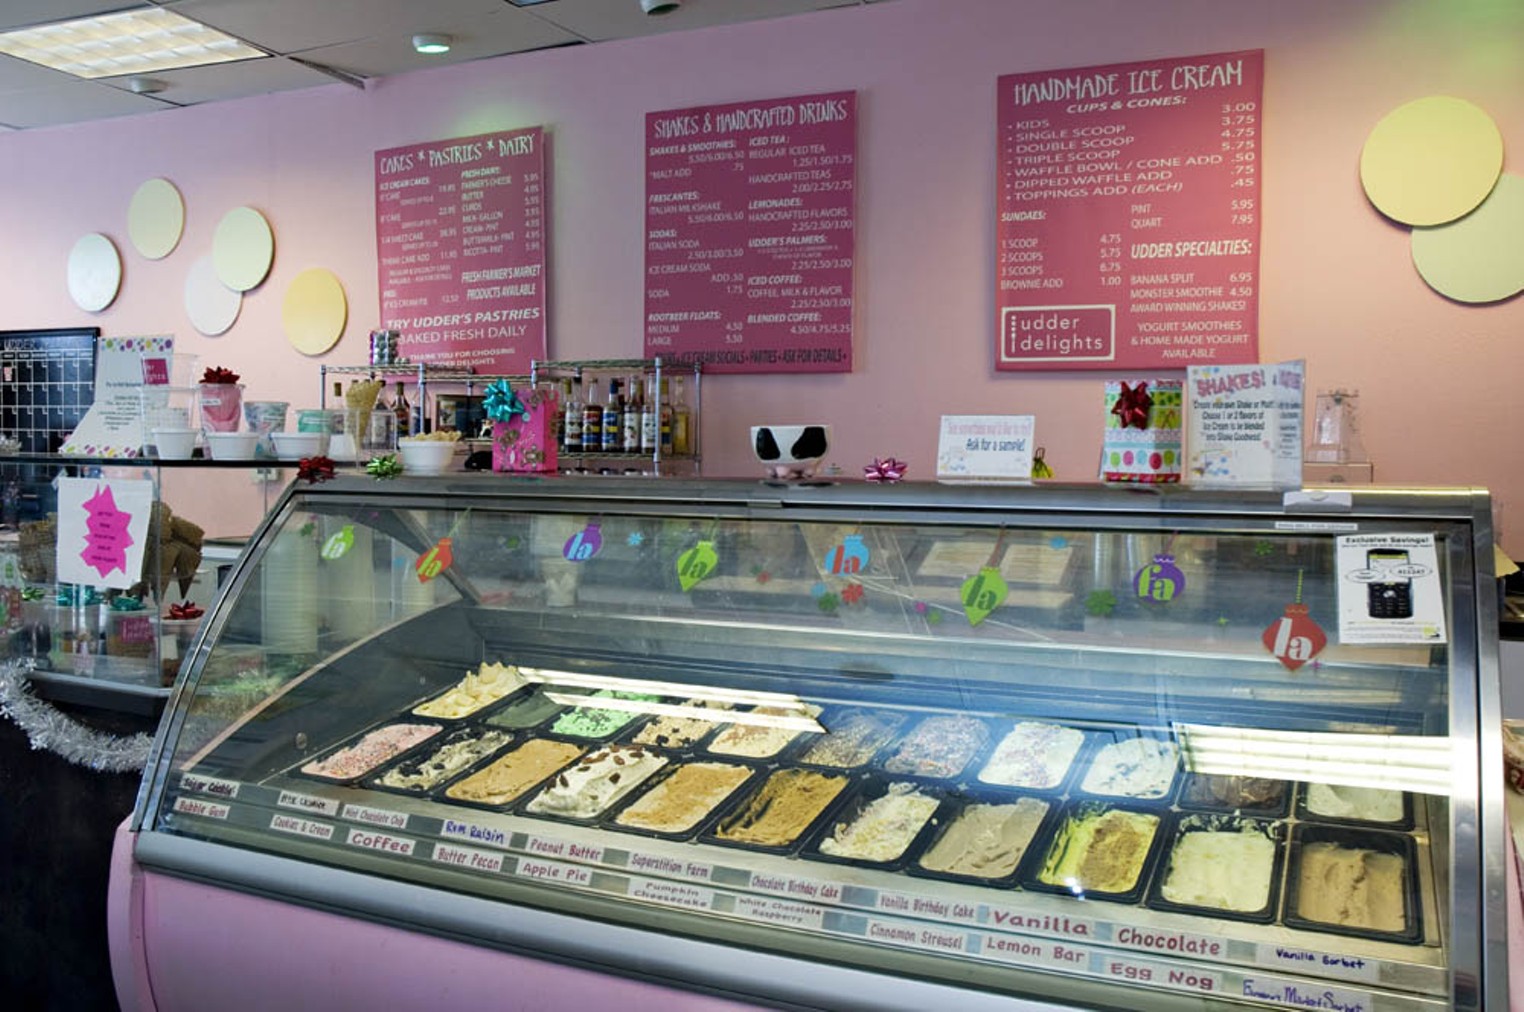 A dessert and ice cream train comes to a Big Mamma Food Court in Paris! 